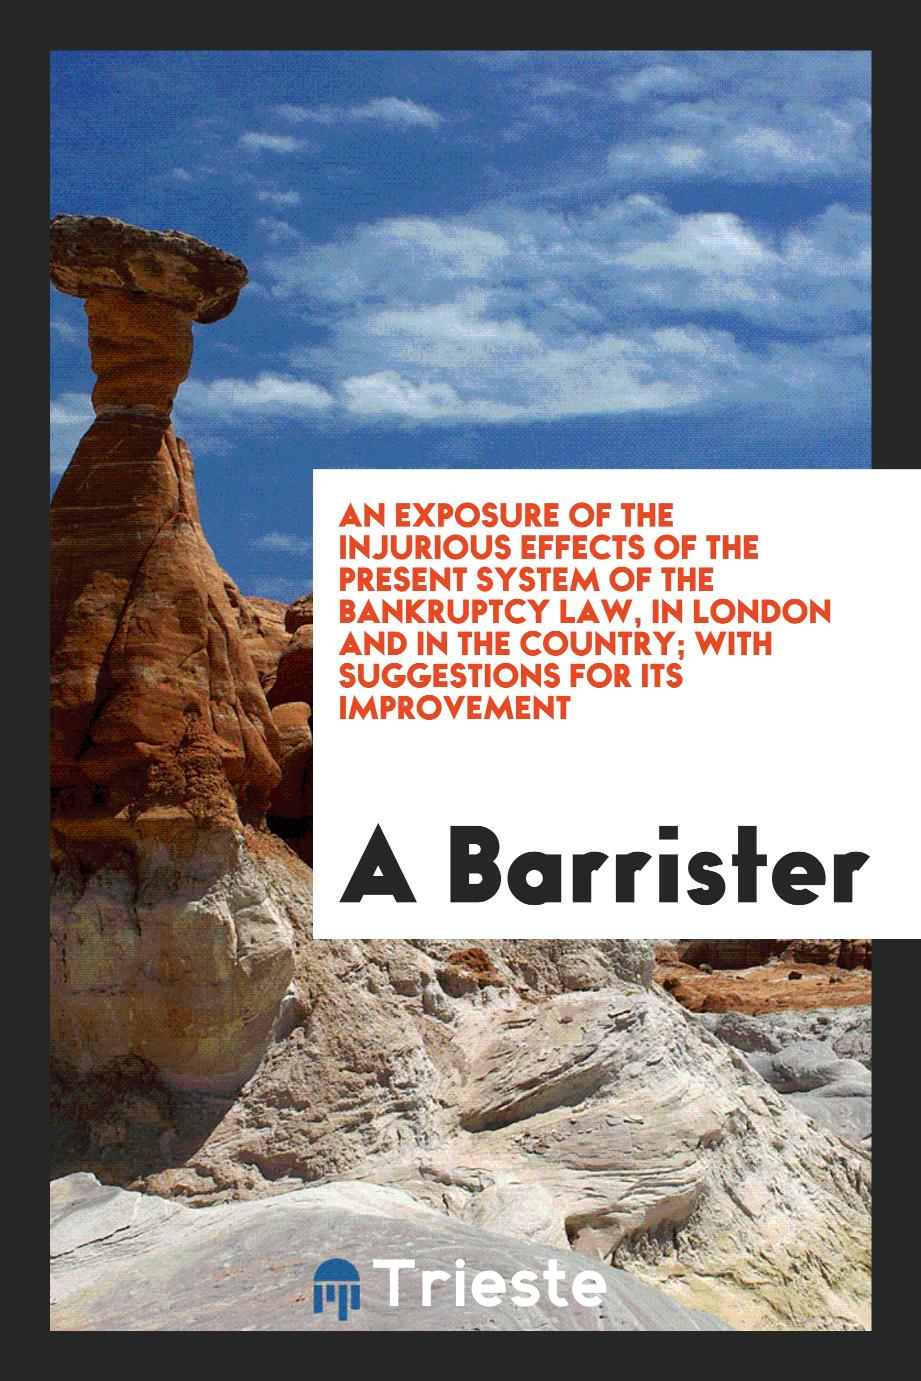 An exposure of the injurious effects of the present system of the bankruptcy law, in London and in the country; with suggestions for its improvement